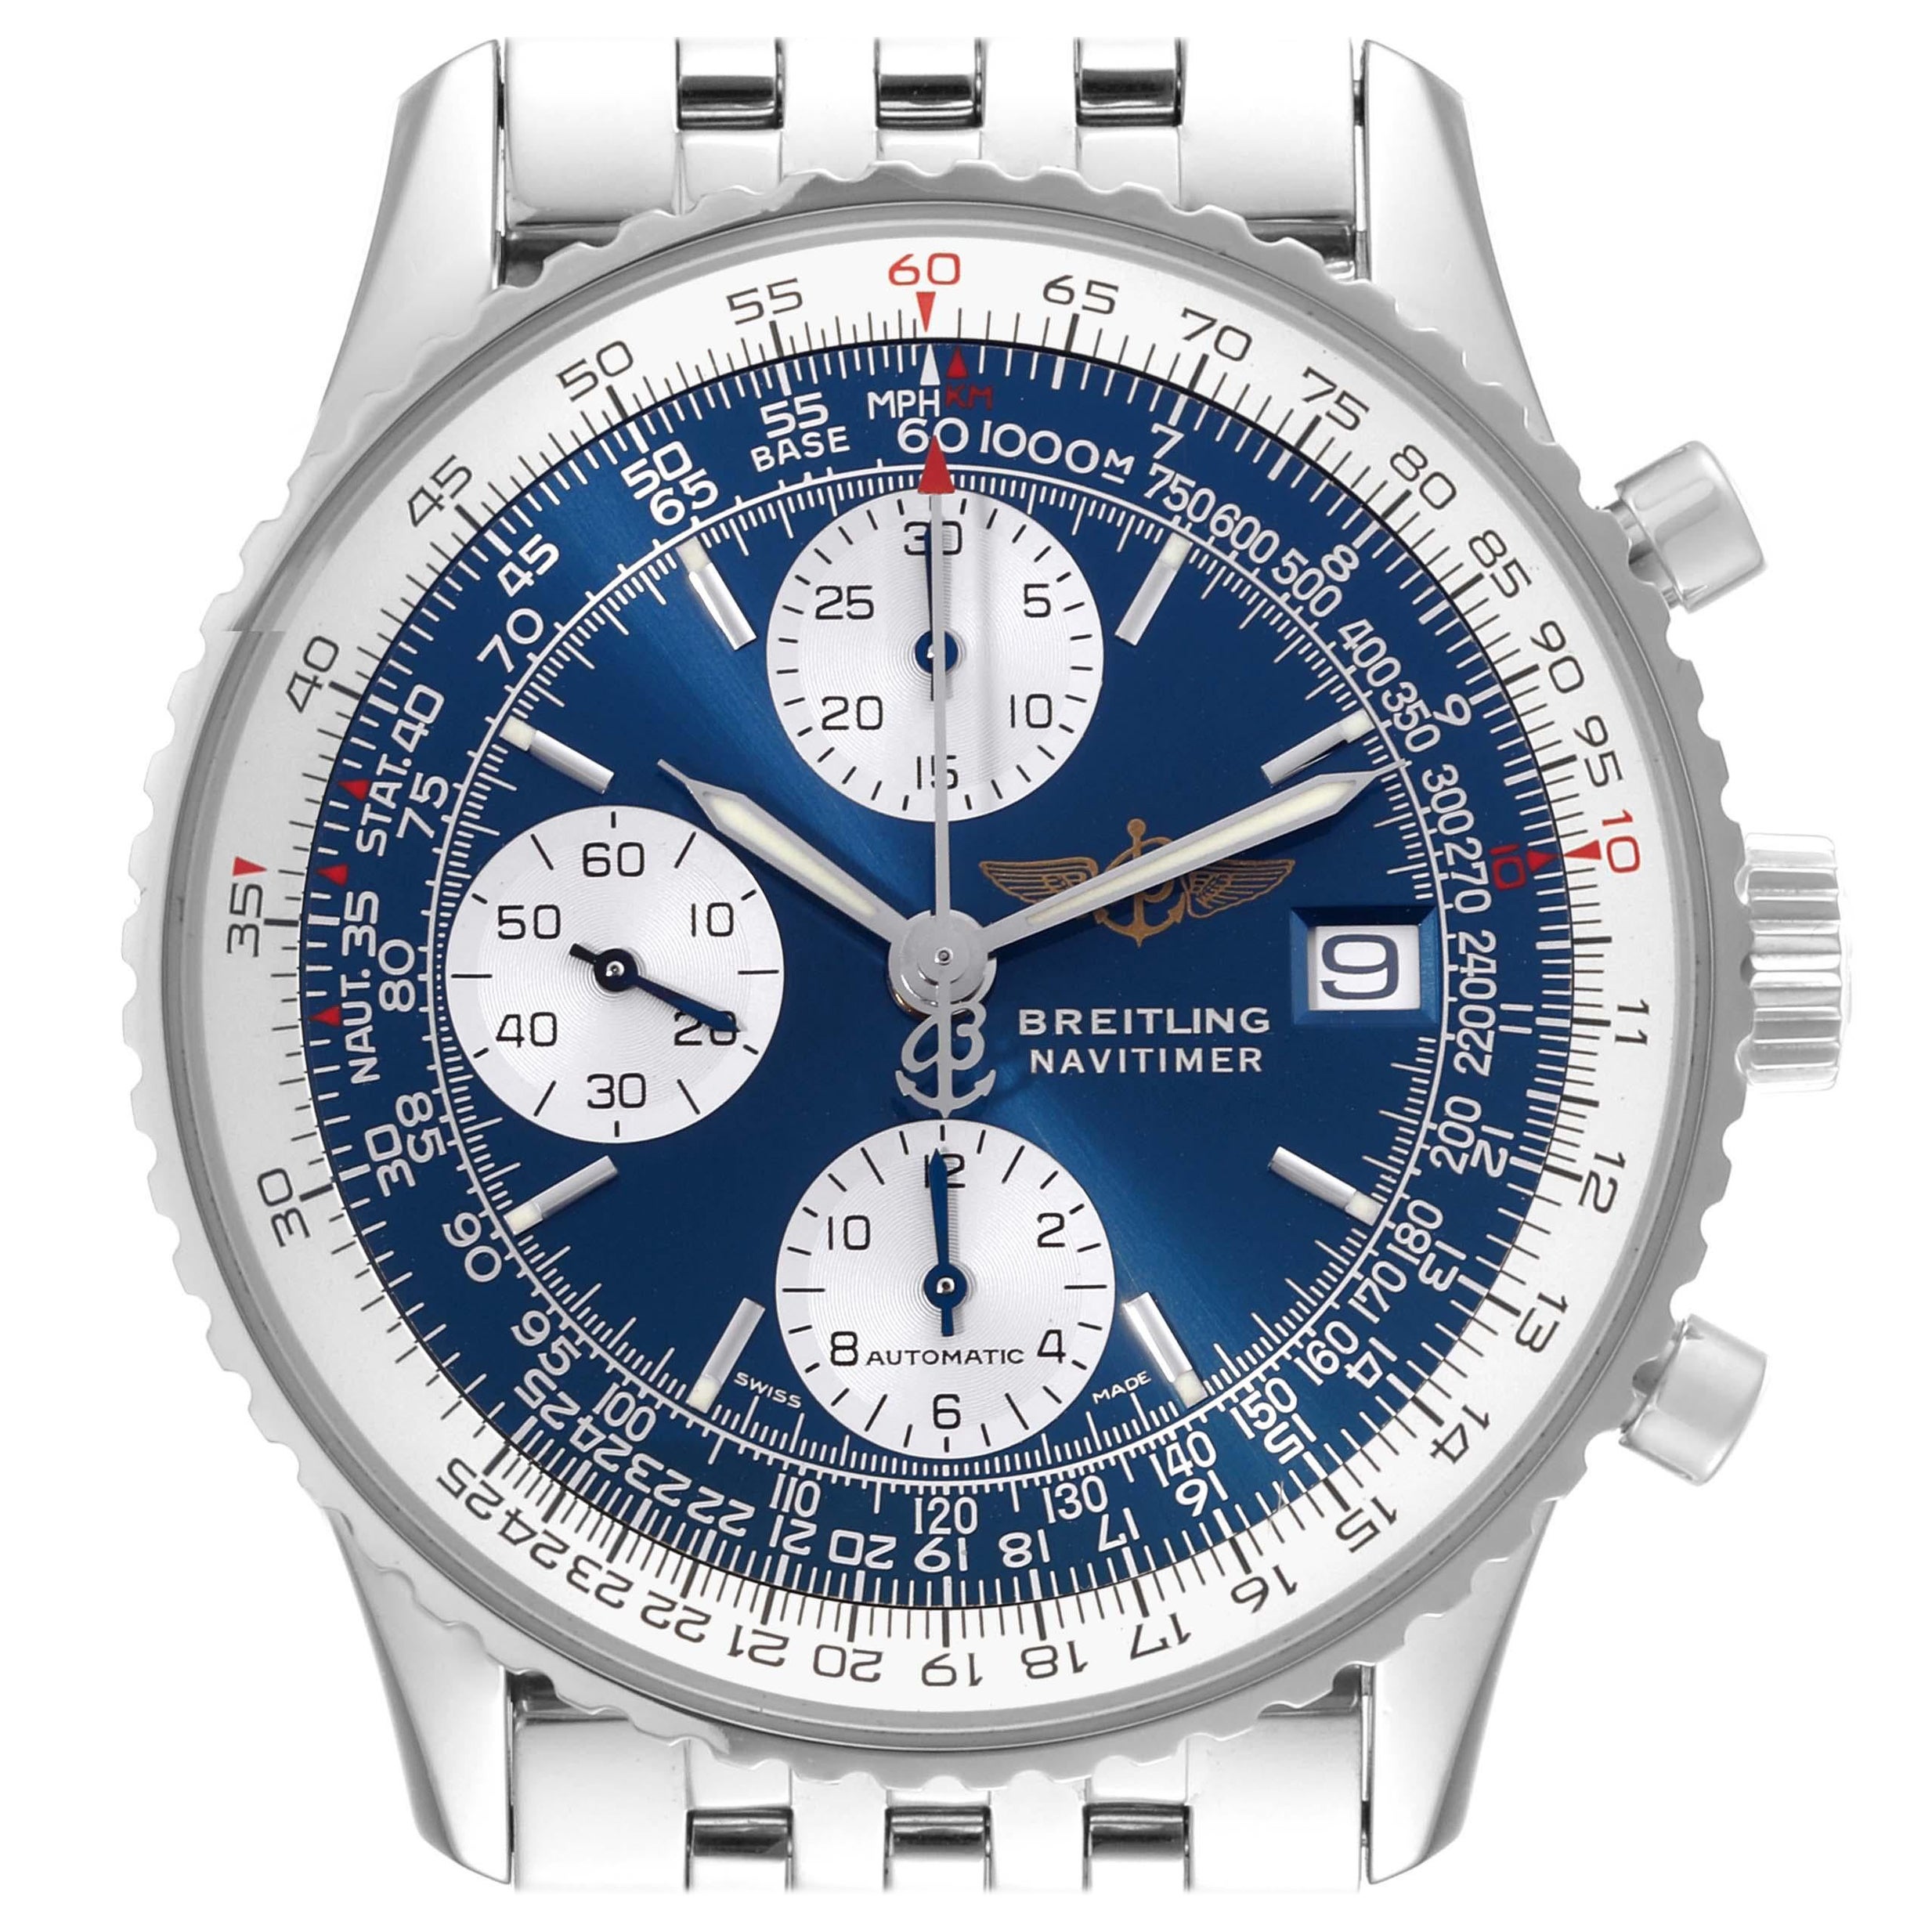 Breitling Navitimer II Blue Dial Chronograph Steel Mens Watch A13322 Box Papers